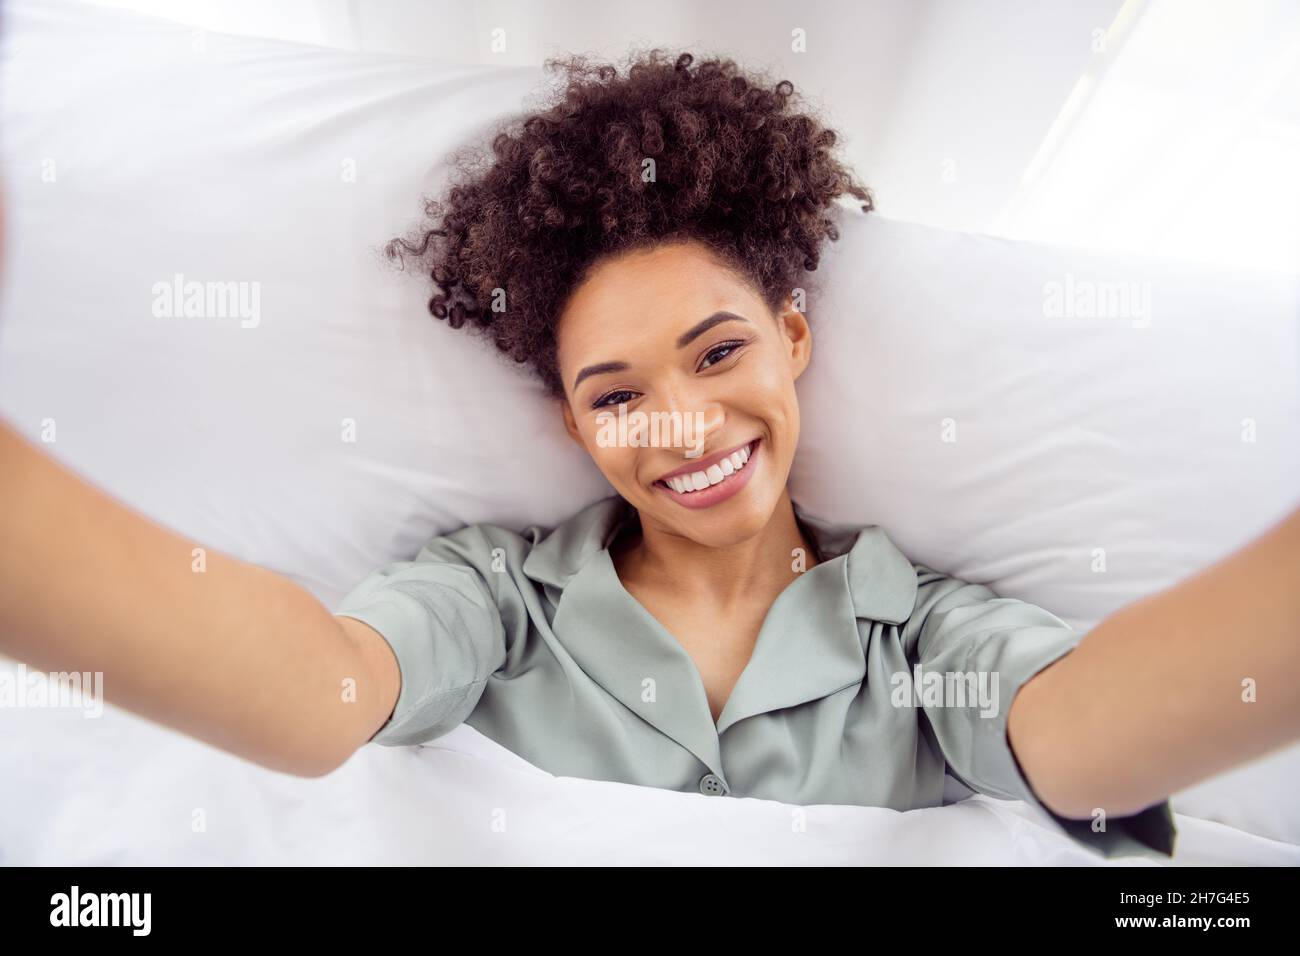 Self Portrait Of Attractive Cheerful Healthy Wavy Haired Girl Lying In